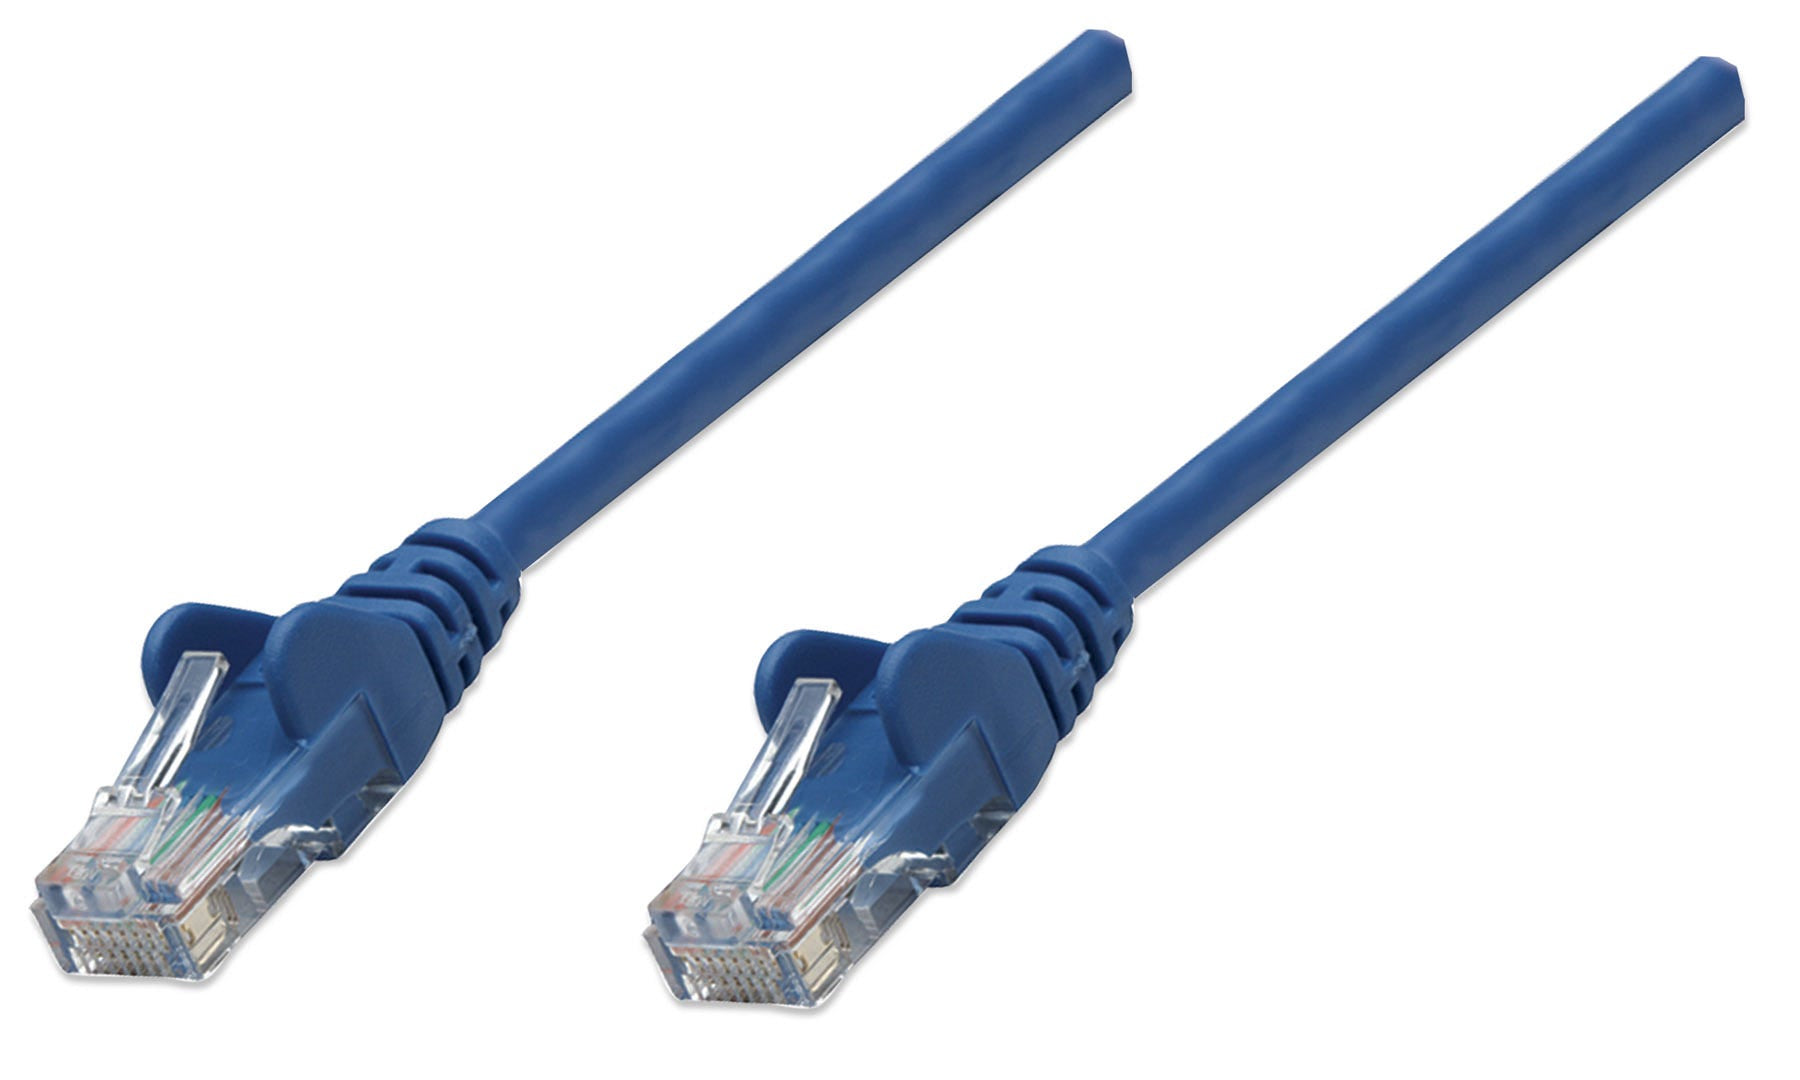 Intellinet Network Patch Cable, Cat5e, 10m, Blue, CCA, U/UTP, PVC, RJ45, Gold Plated Contacts, Snagless, Booted, Lifetime Warranty, Polybag